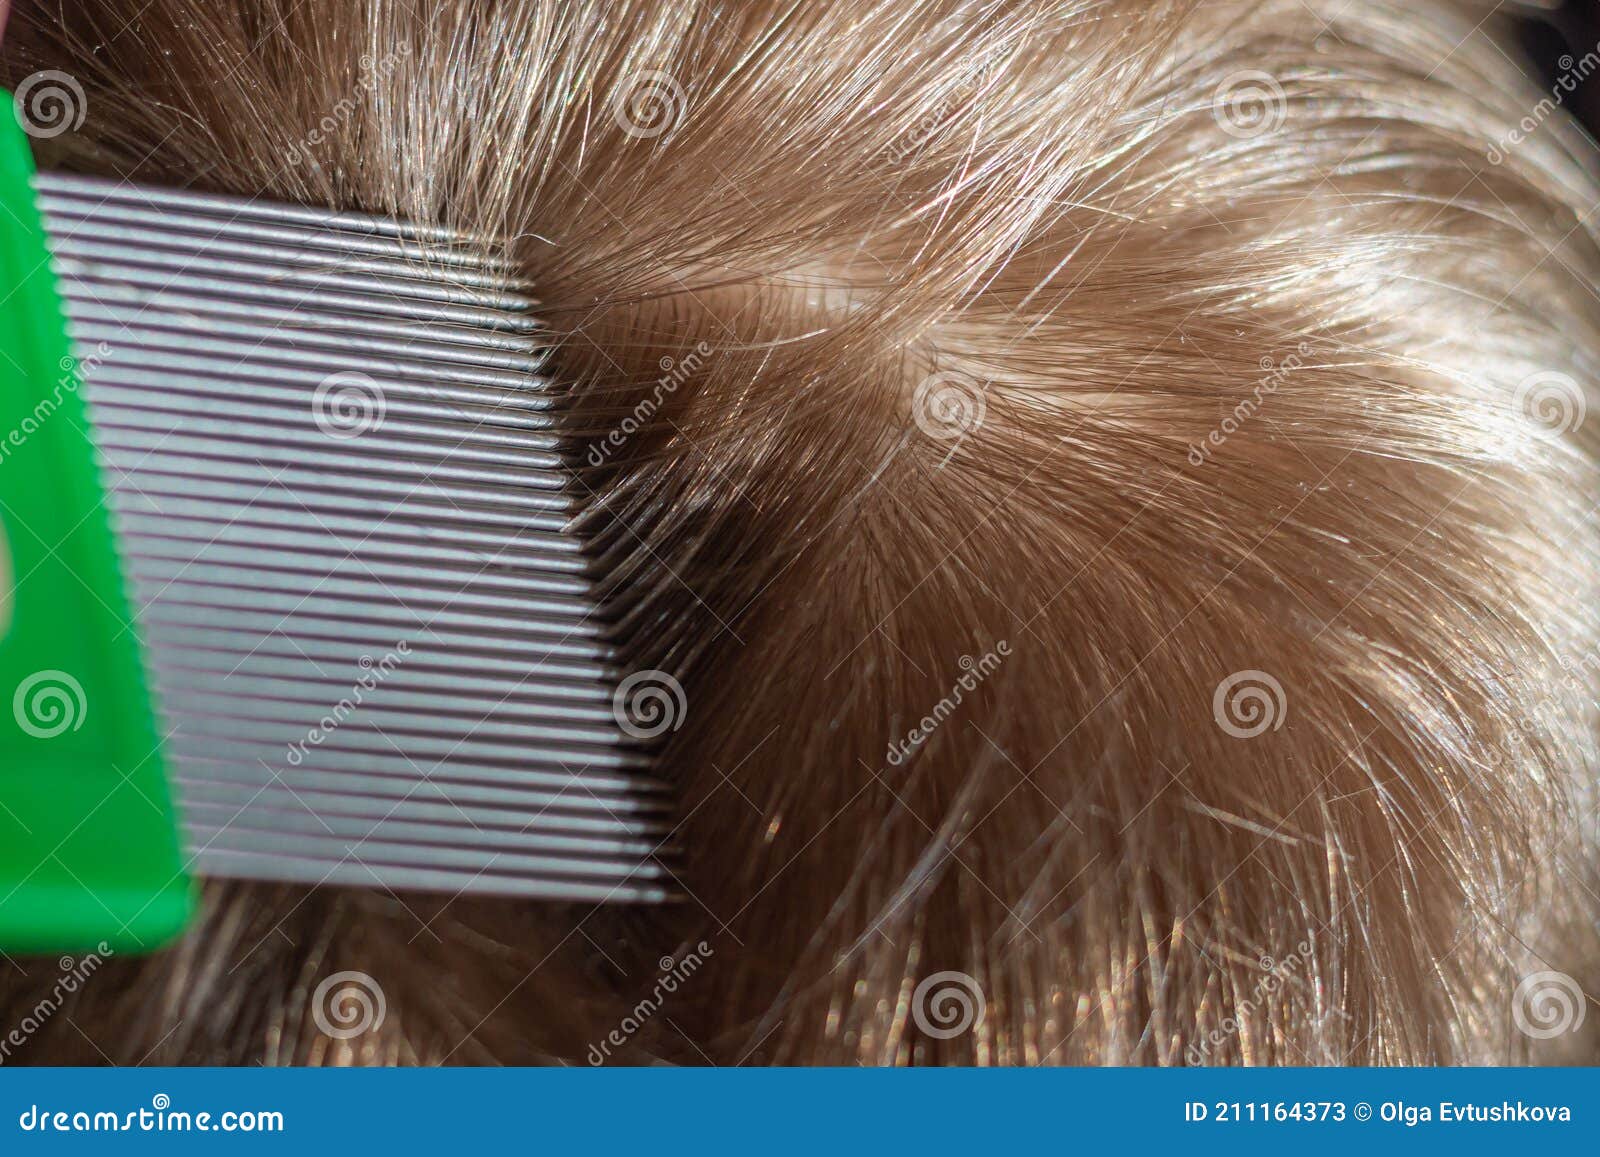 Comb Out Lice from the Hair with a Special Comb with Frequent Teeth Stock  Image - Image of infection, groom: 211164373